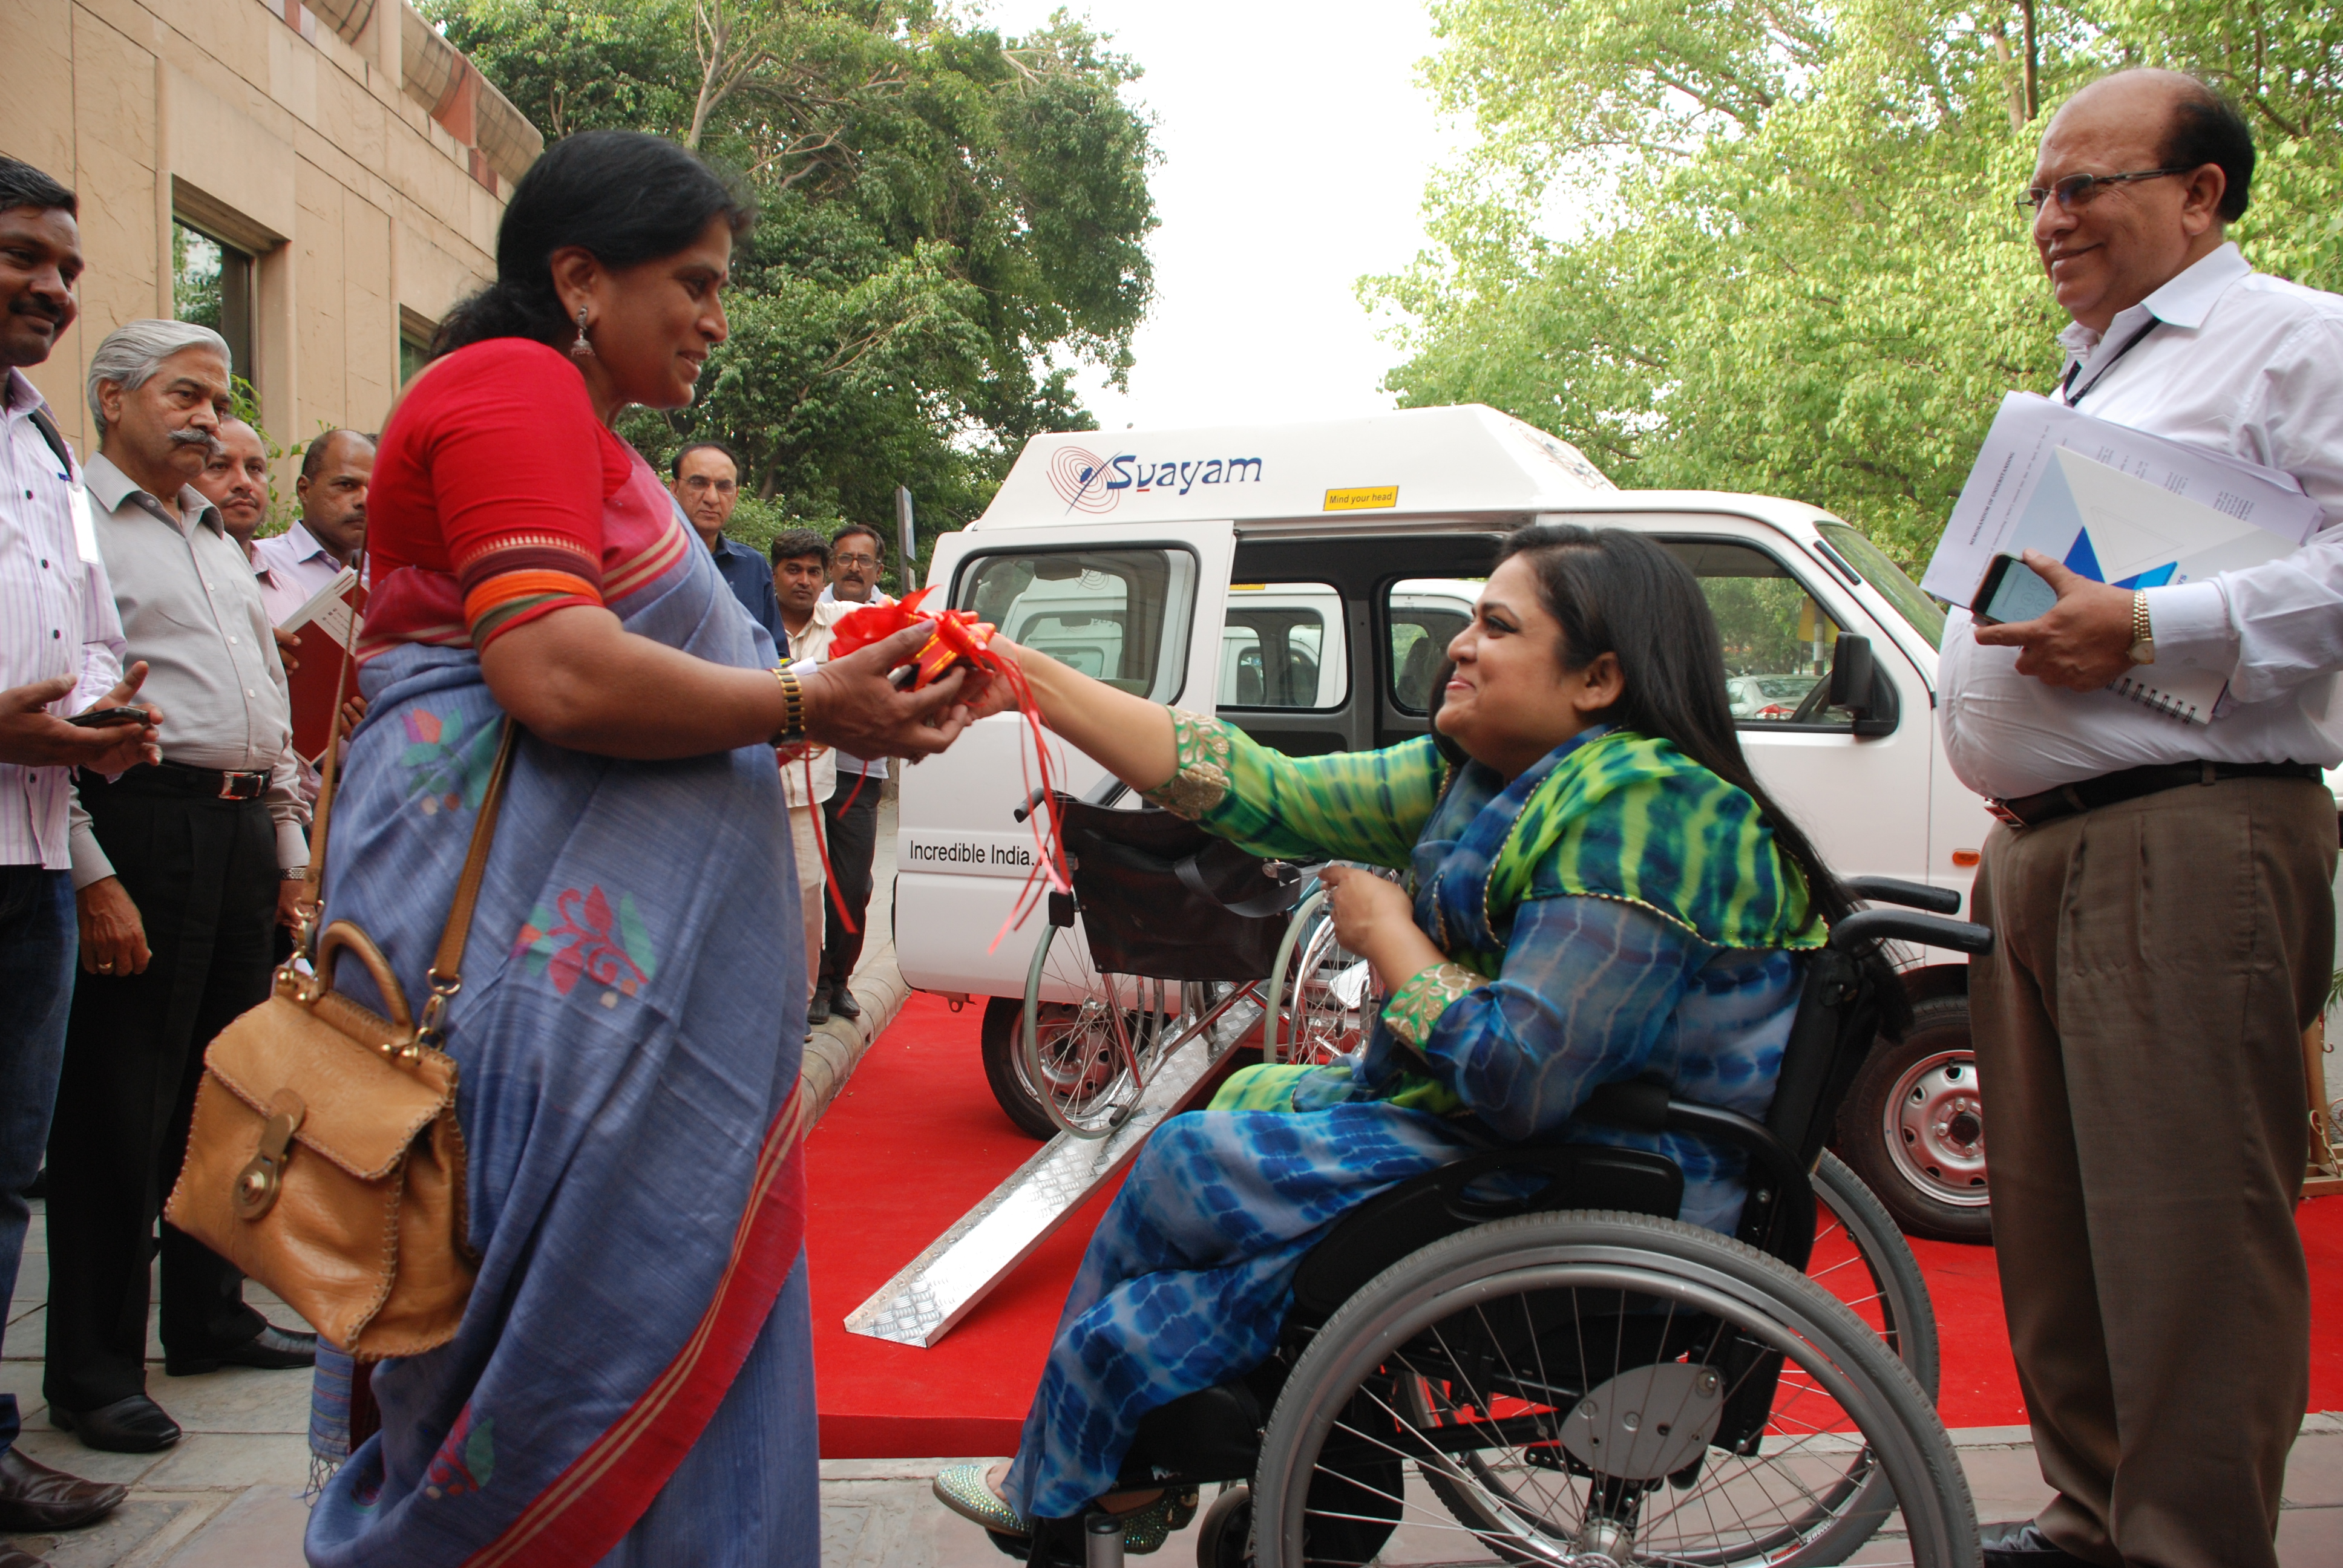 Ms. Albina Sarkar, Director Mobility India receiving the keys from the Ms. Sminu Jindal, Founder Svayam